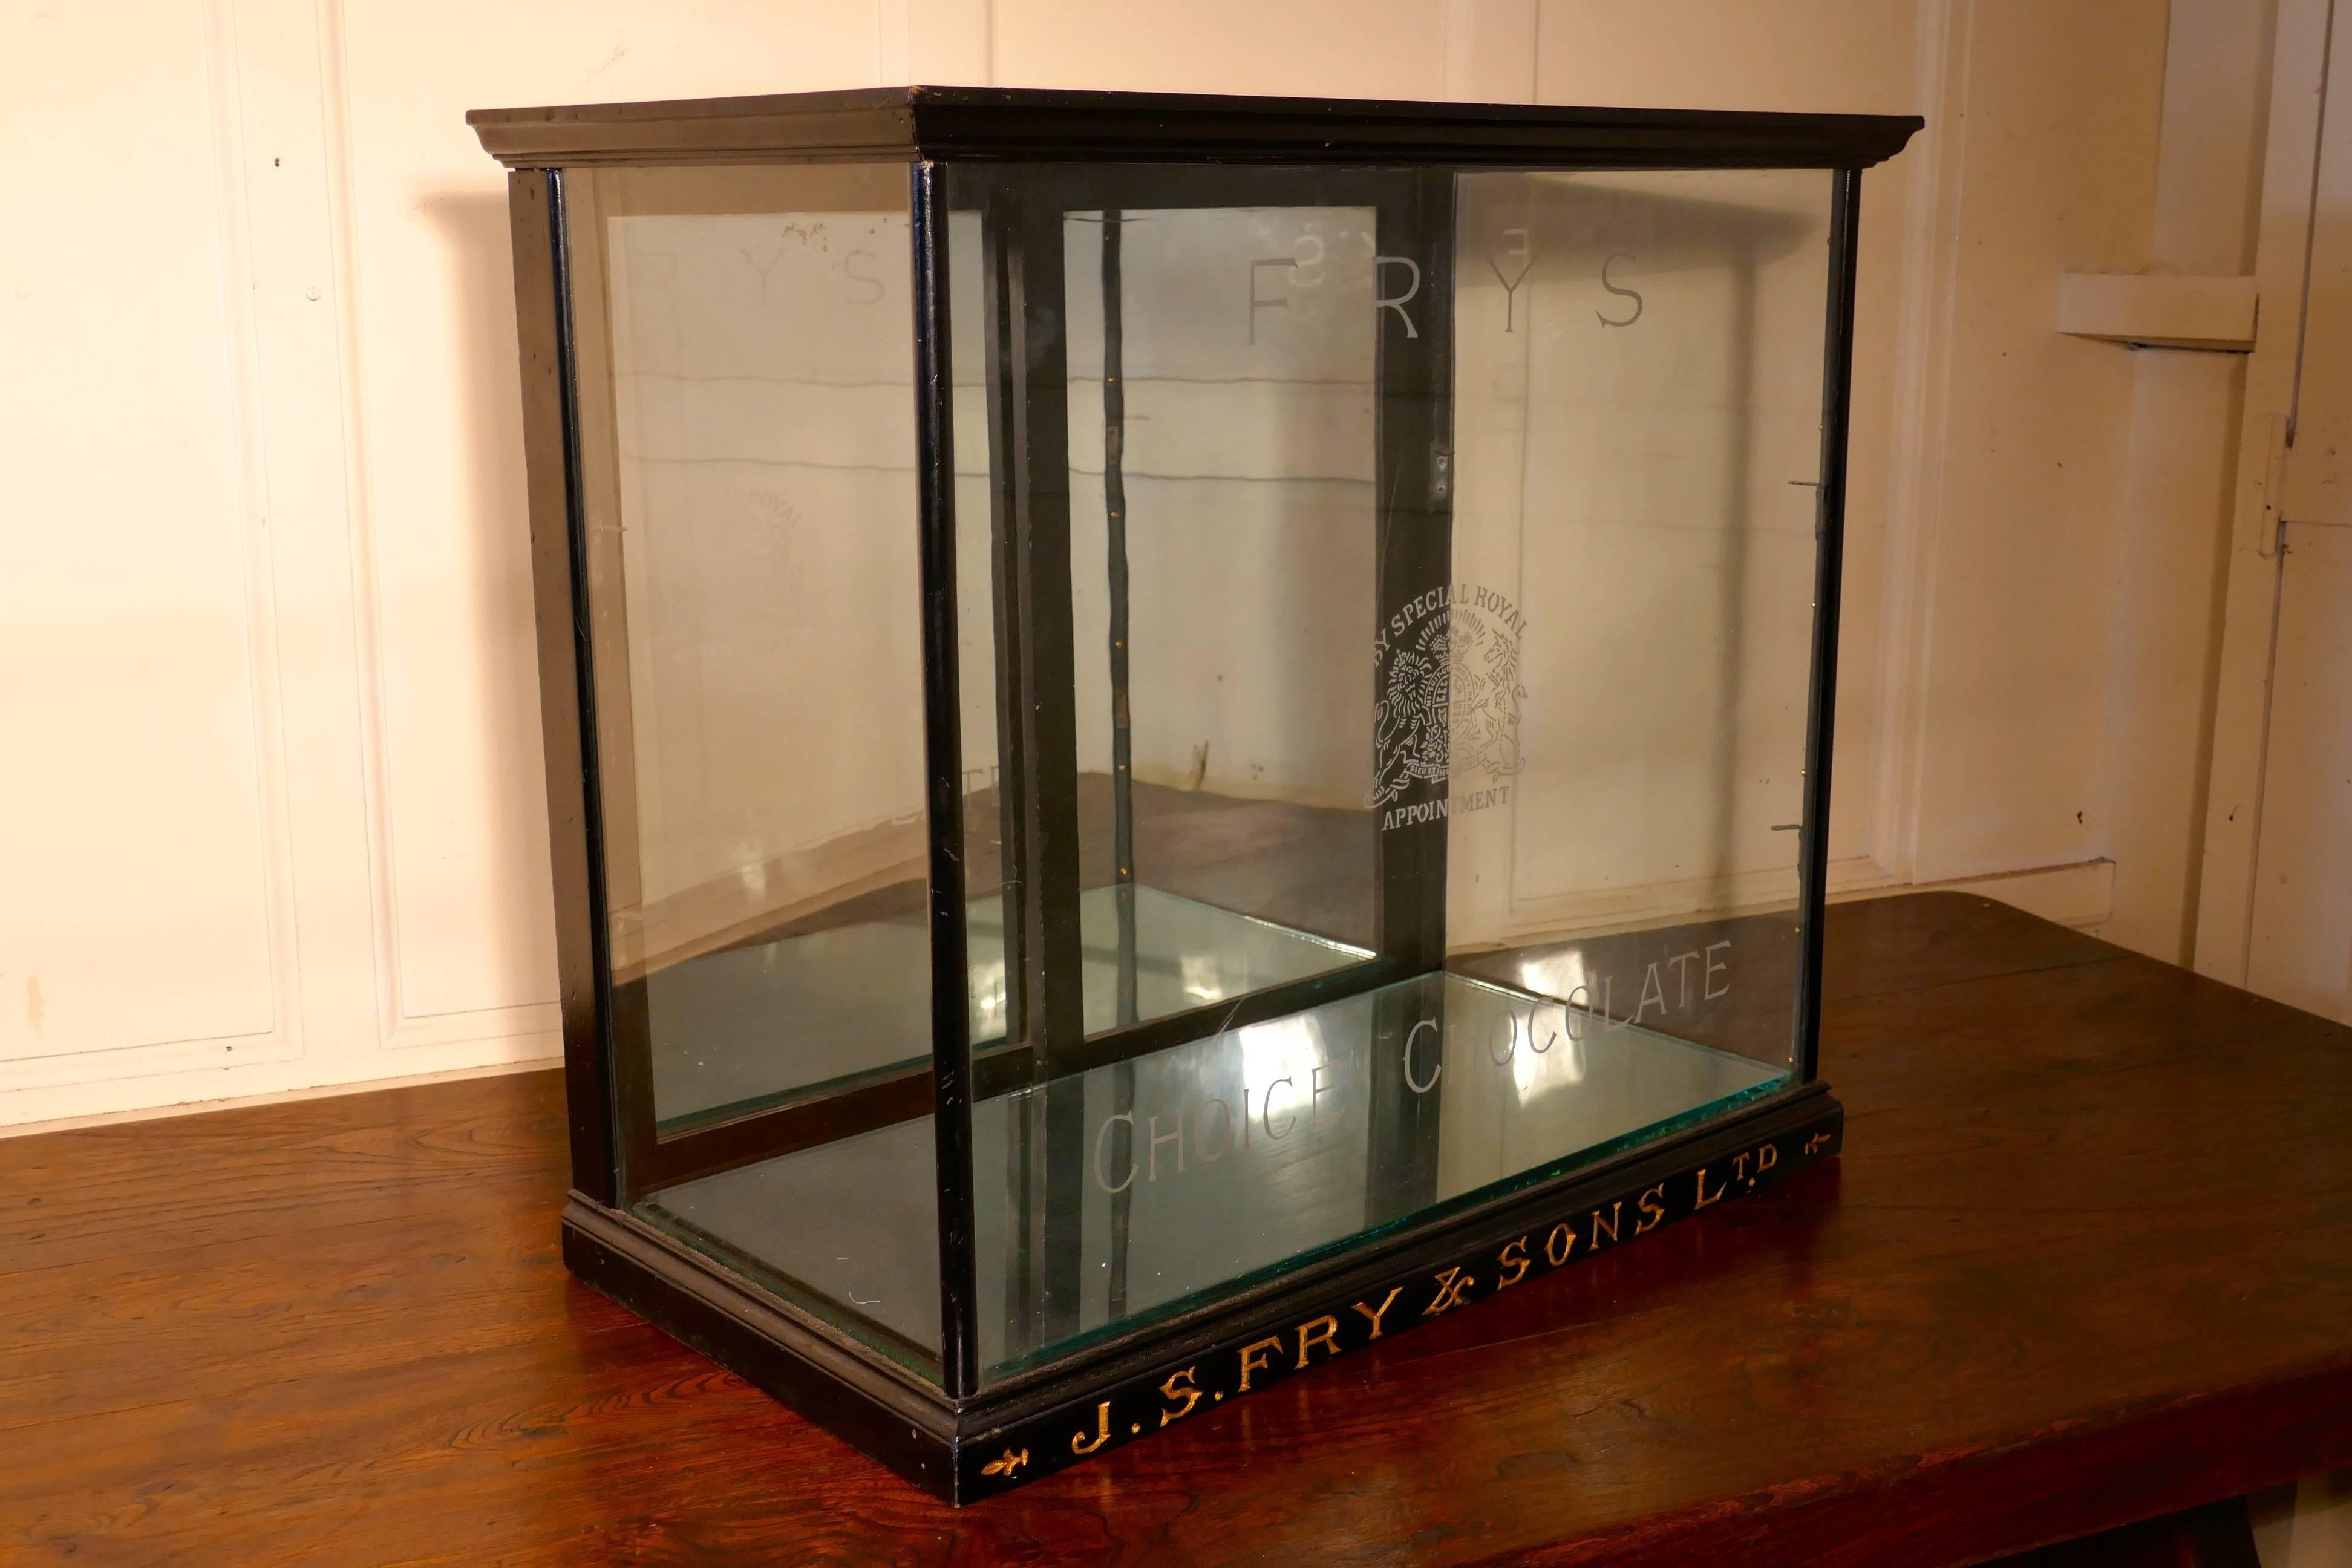 Fry’s Glazed Sweet Shop Display Cabinet

This Charming FRY’s Sweet Shop Display Cabinet is a counter top piece, the interior is accessed through sliding mirrored doors on the back, on the front glass it has a “Special Royal Appointment, FRY’s and